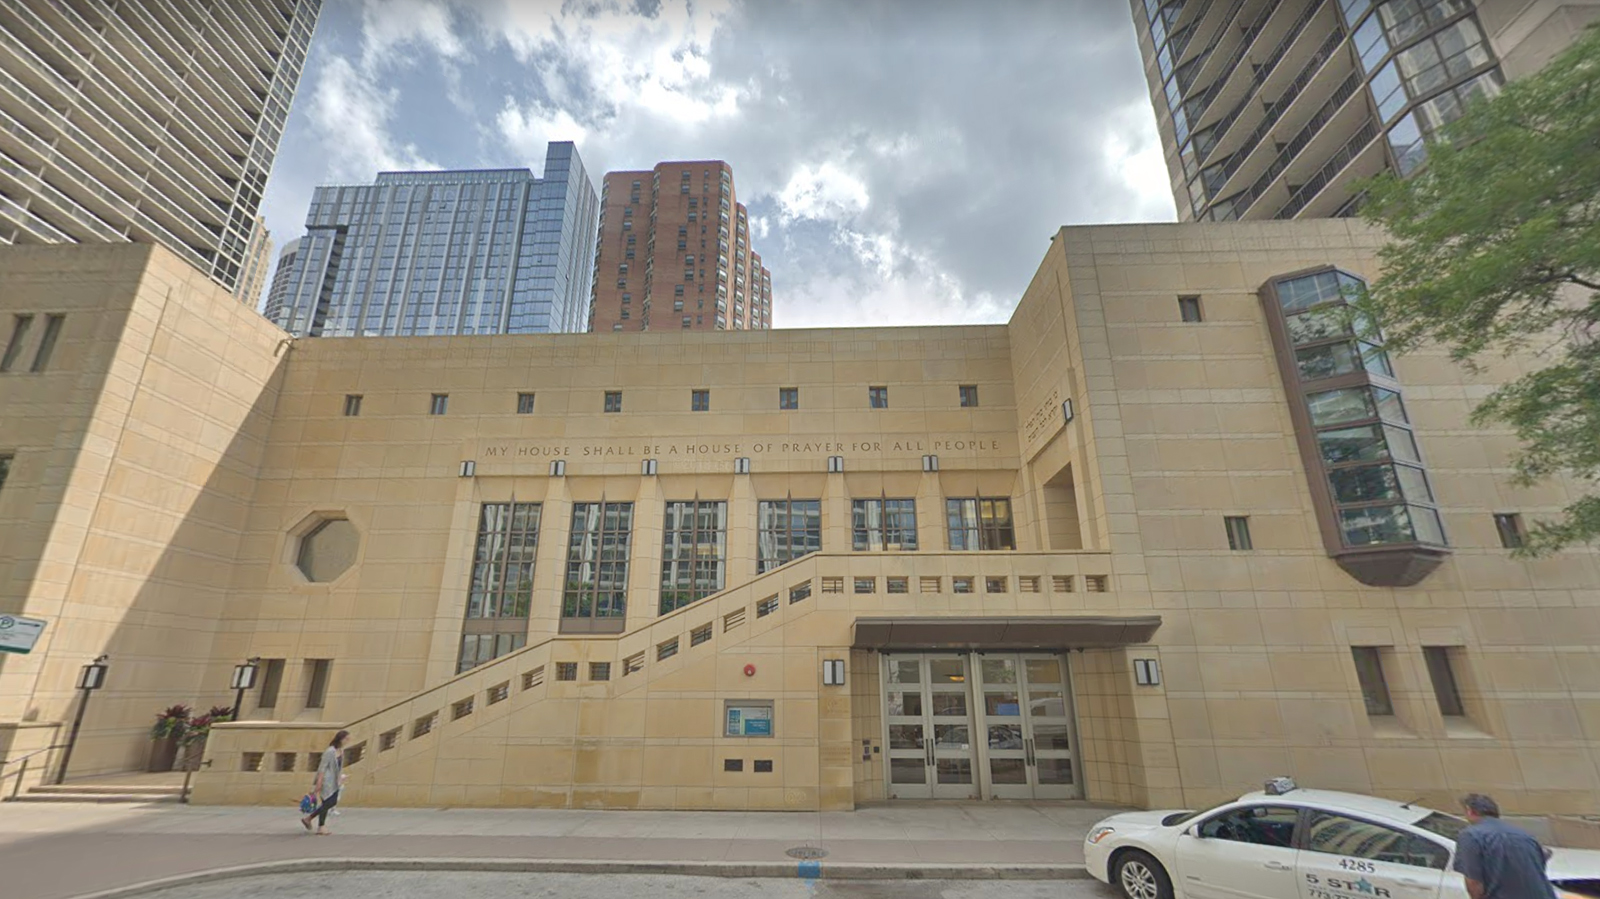 Chicago rabbi is out months after hostile workplace investigation #bitcoin #news #today #Chicago #rabbi #months #hostile #workplace #investigation